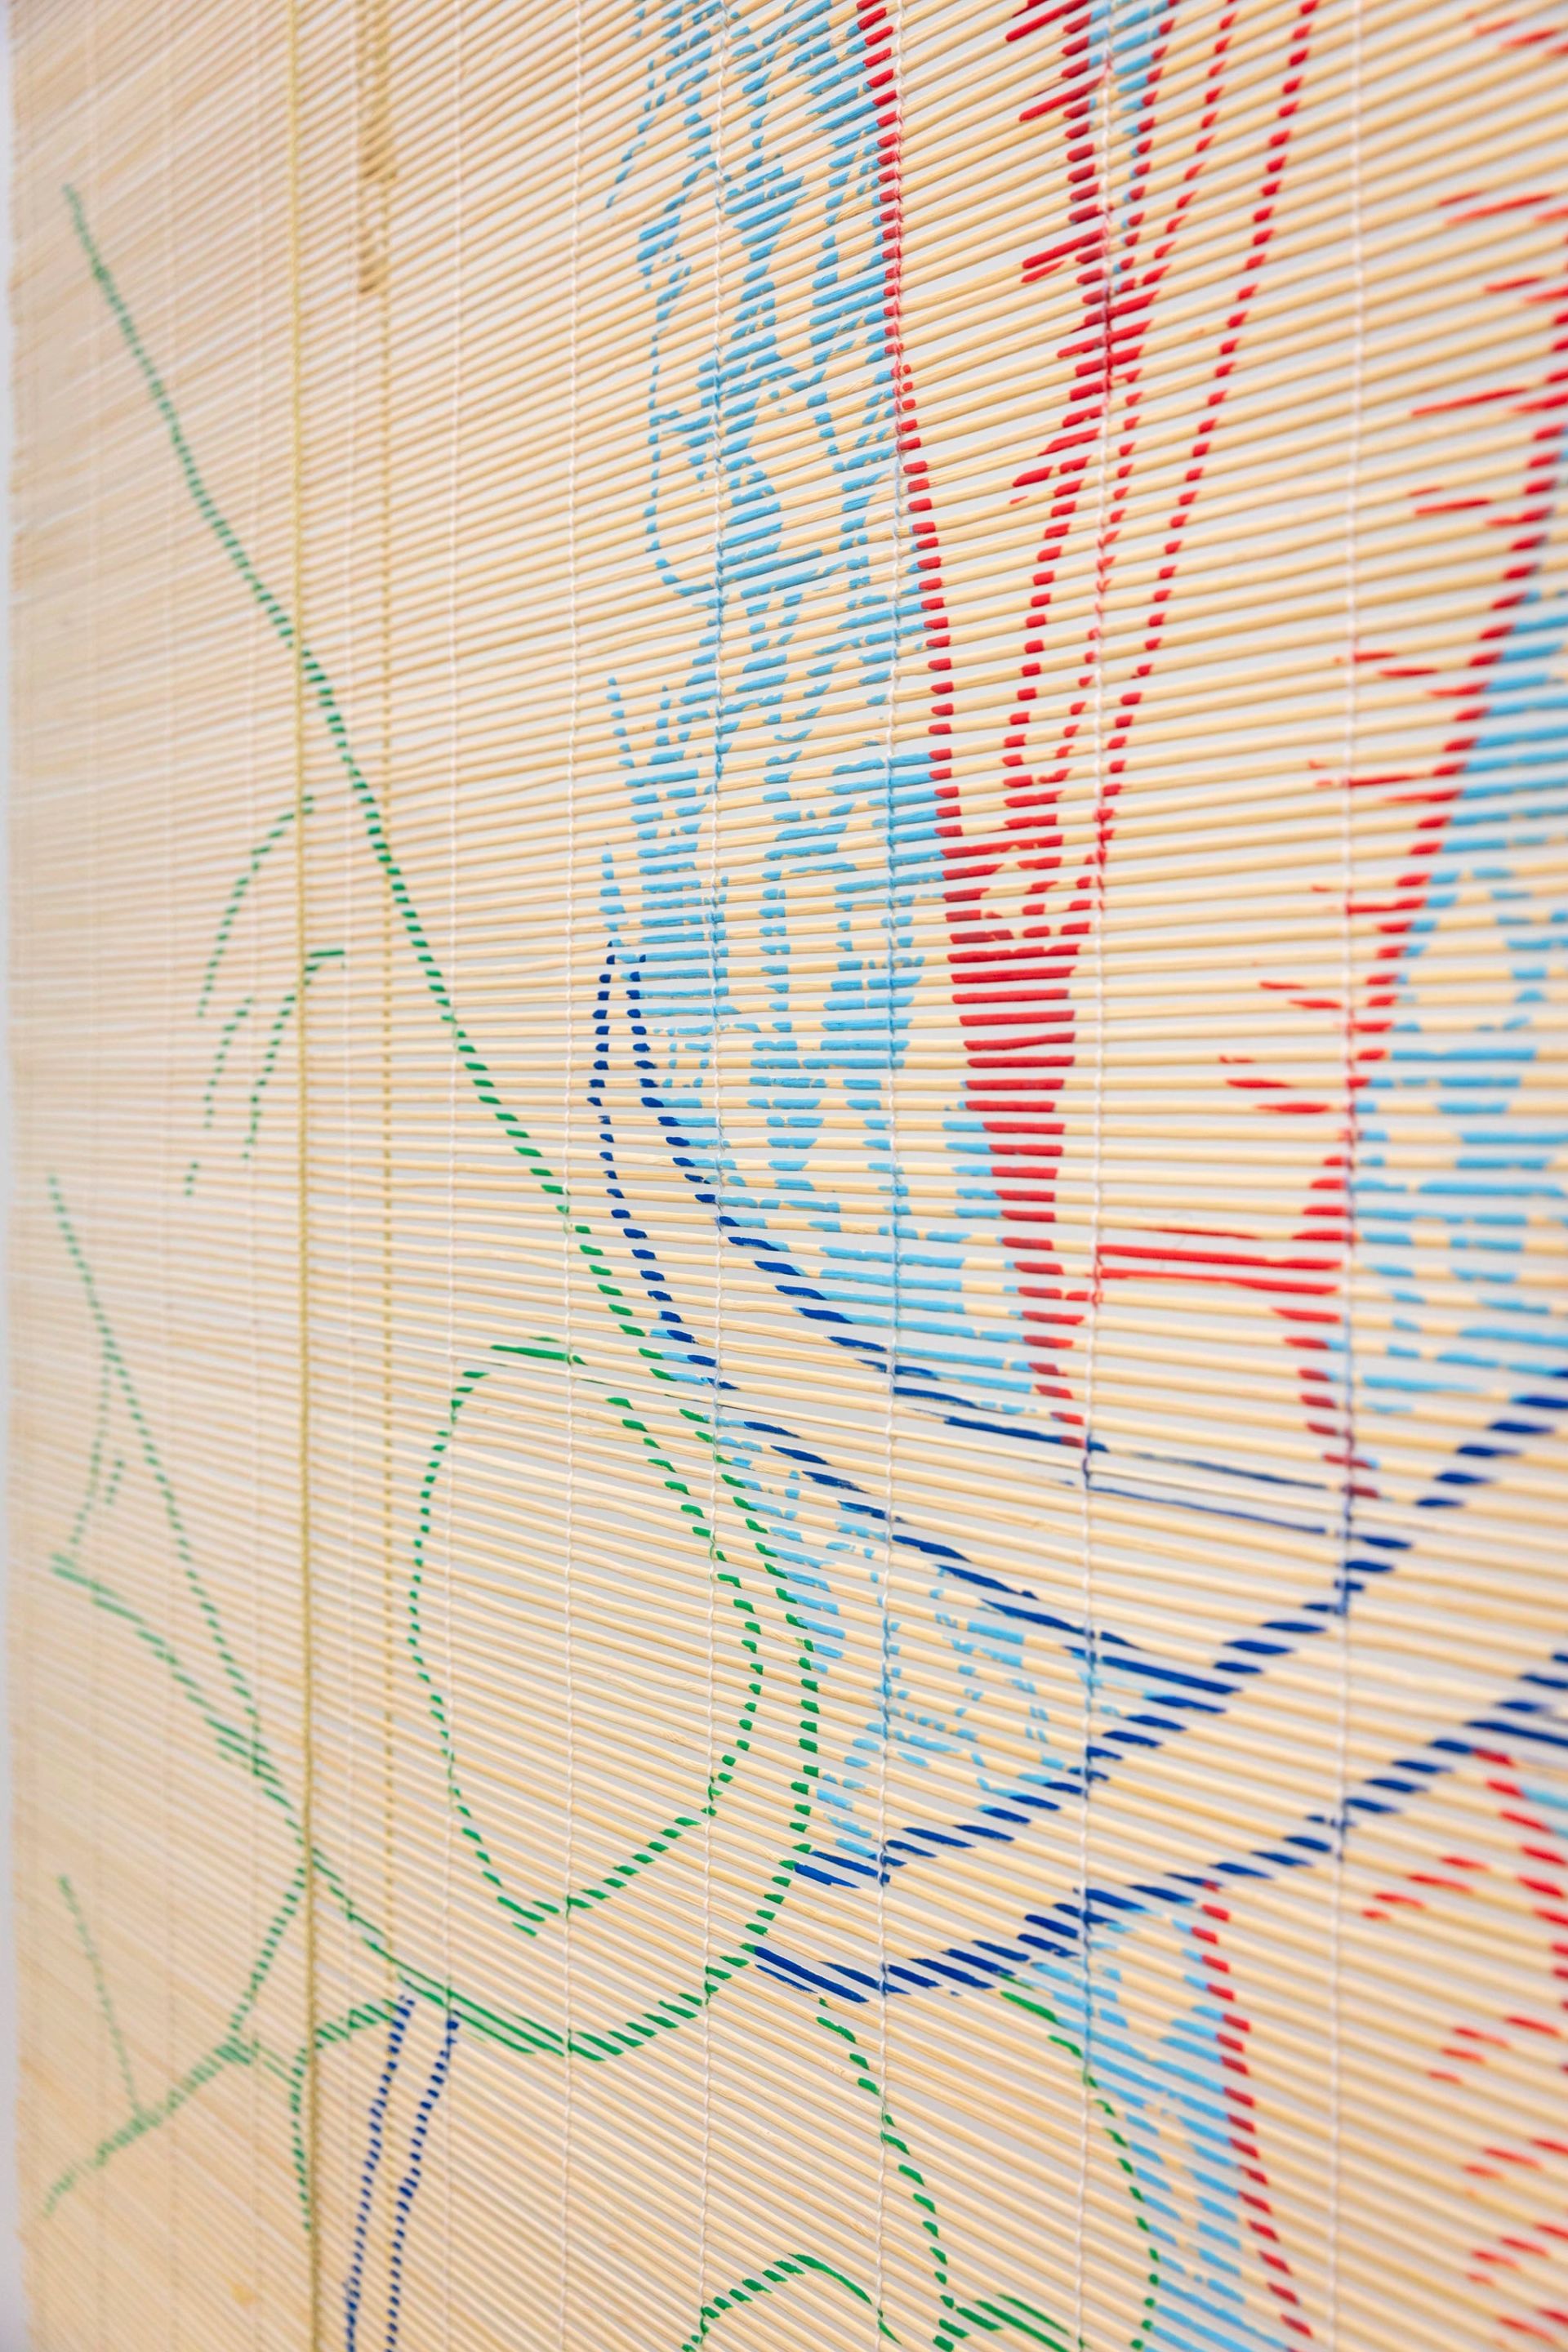 Sergio Rojas Chaves, A ‘hands-on’ approach #3, 2022, Acrylic paint on bamboo curtain, 140 × 180 cm